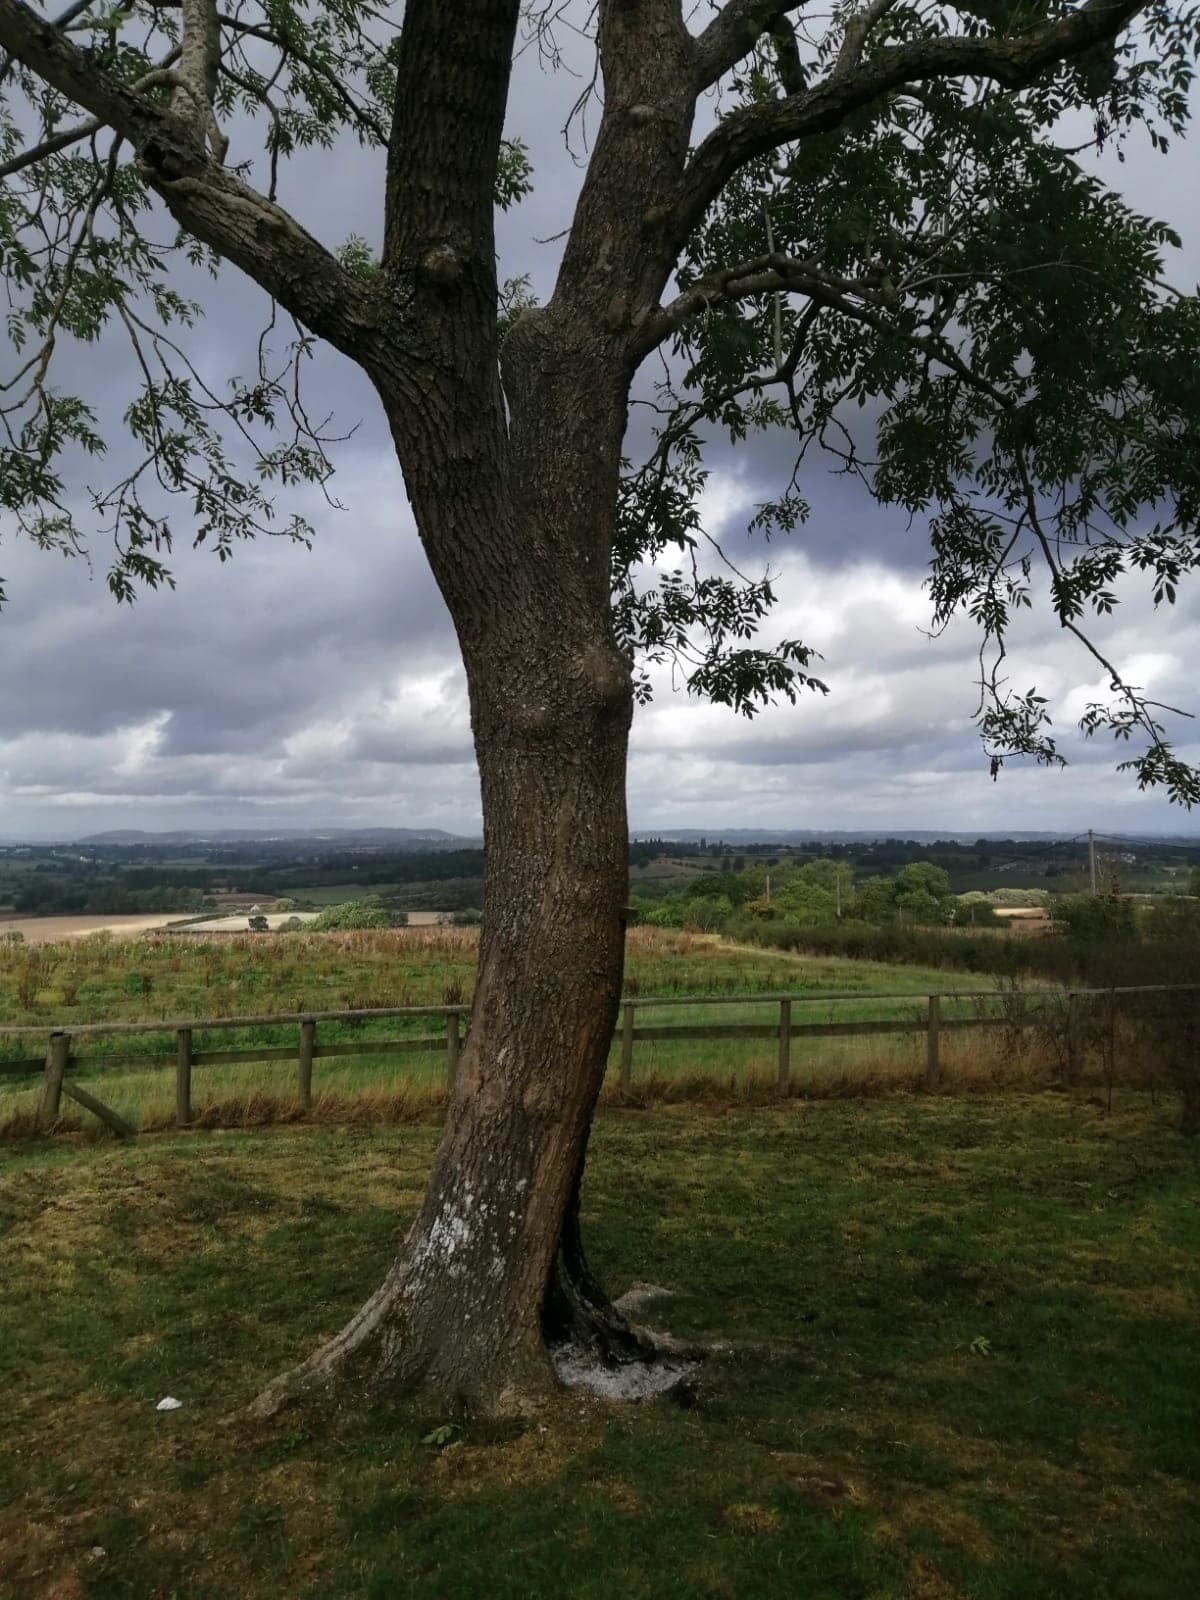 The beautiful guardian ash tree at Swarden Quarry was set on fire. Picture: Dormington and Mordiford Parish Council